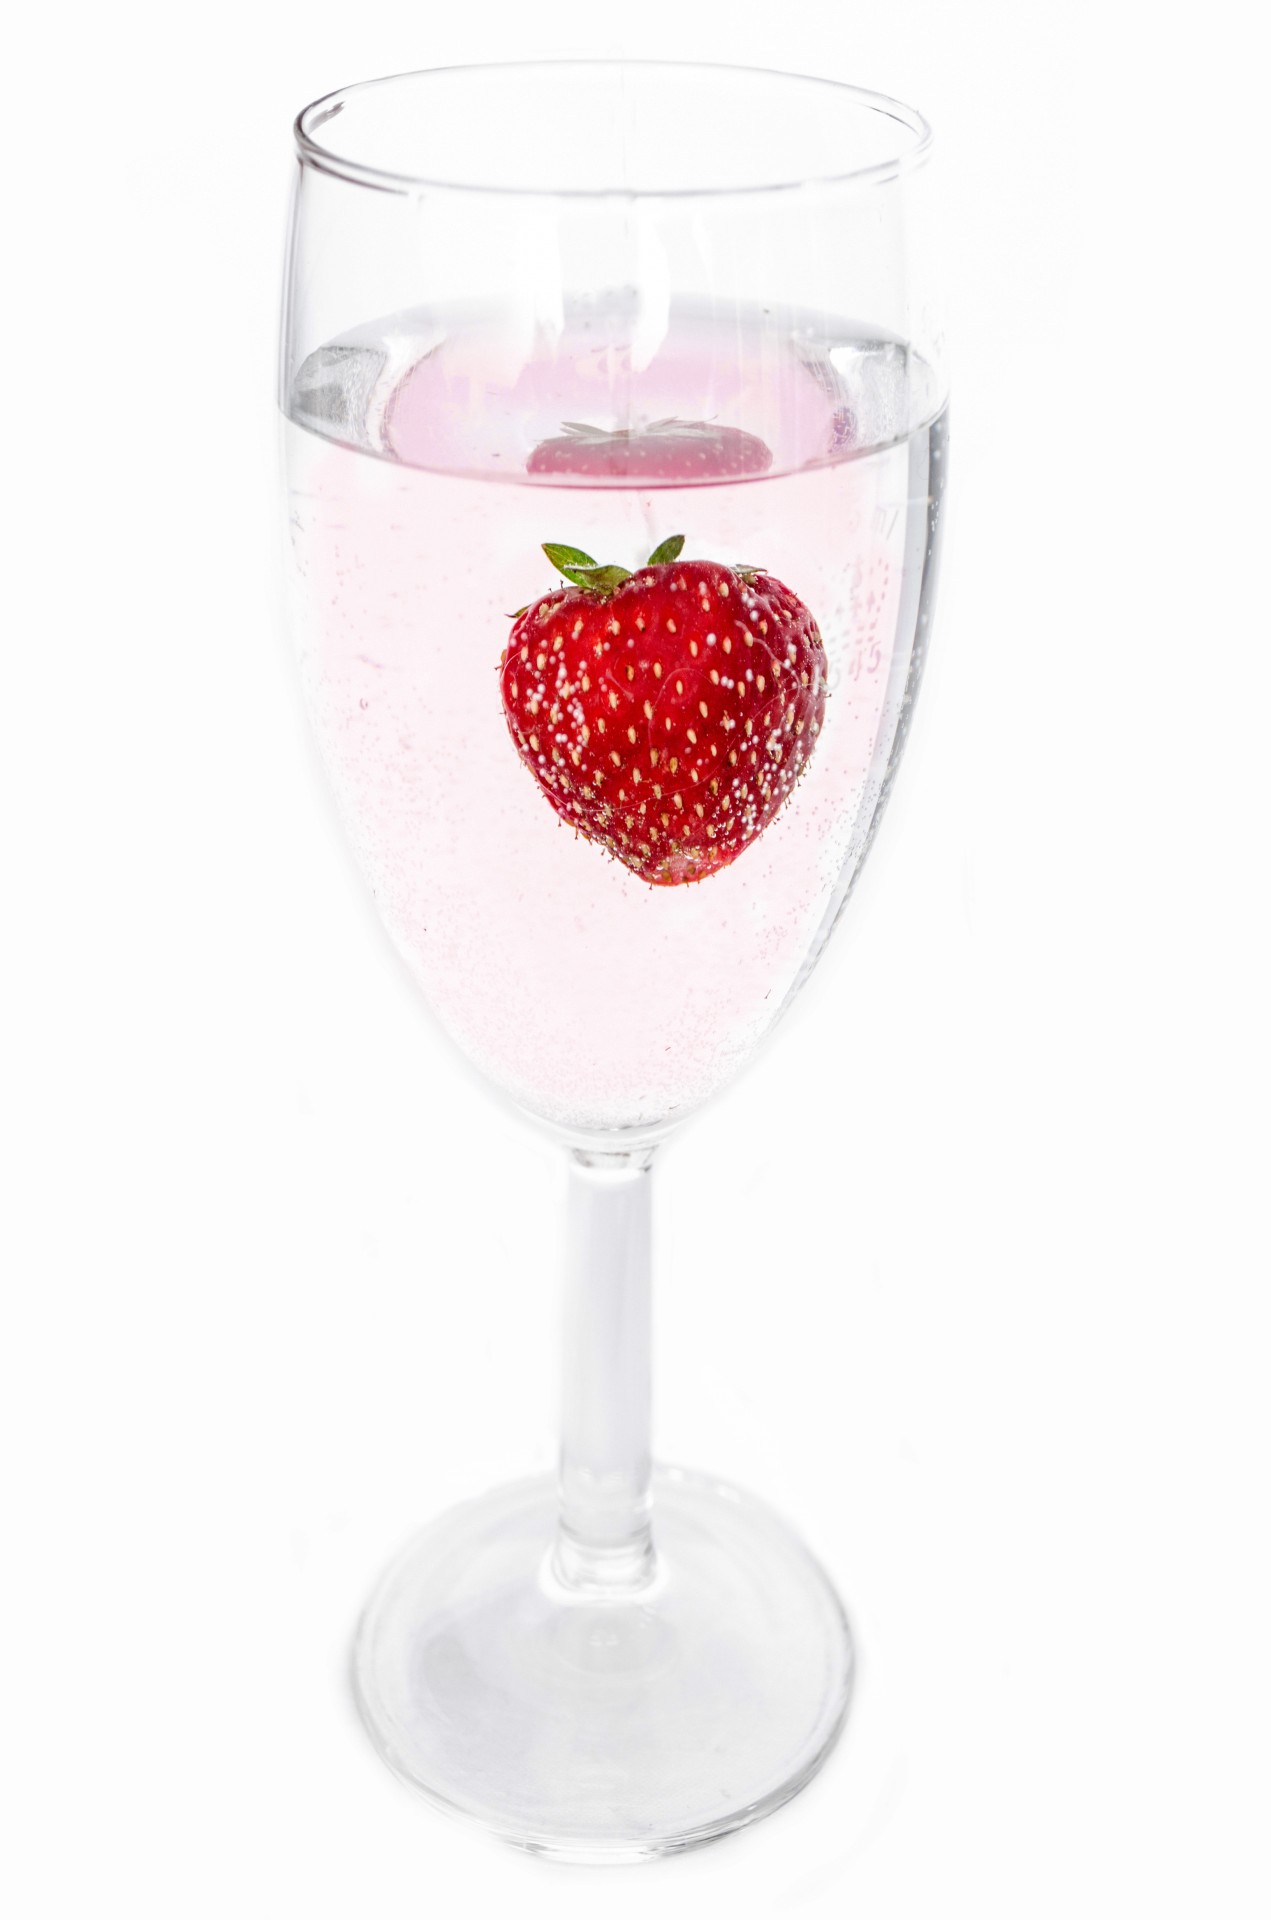 Champagne And Strawberry